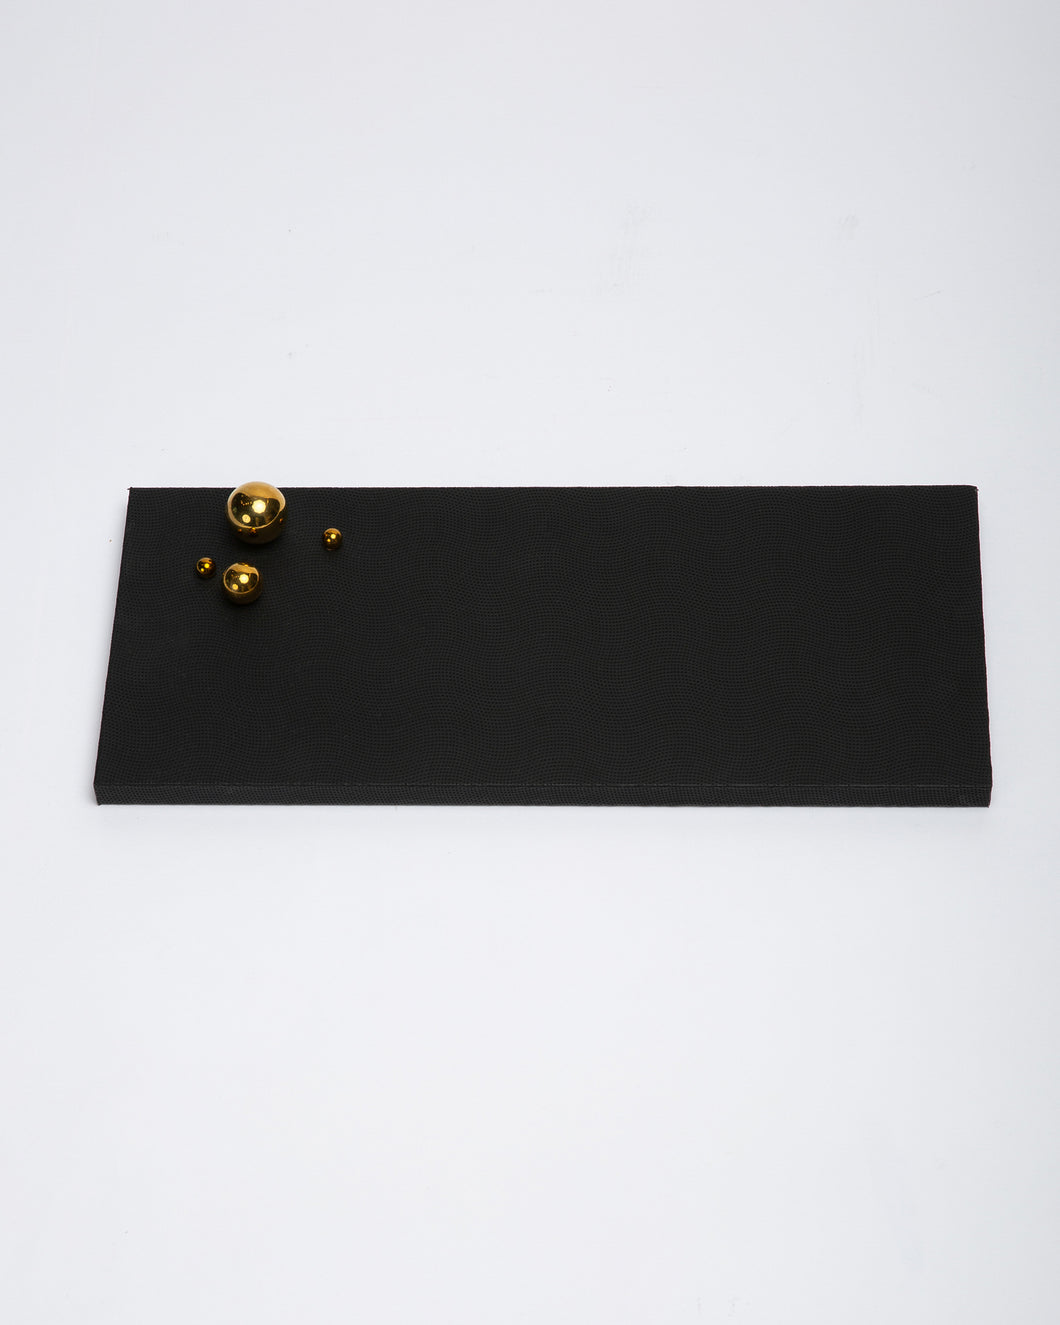 Giobagnara Black Leather Tray with Golden Bubbles.